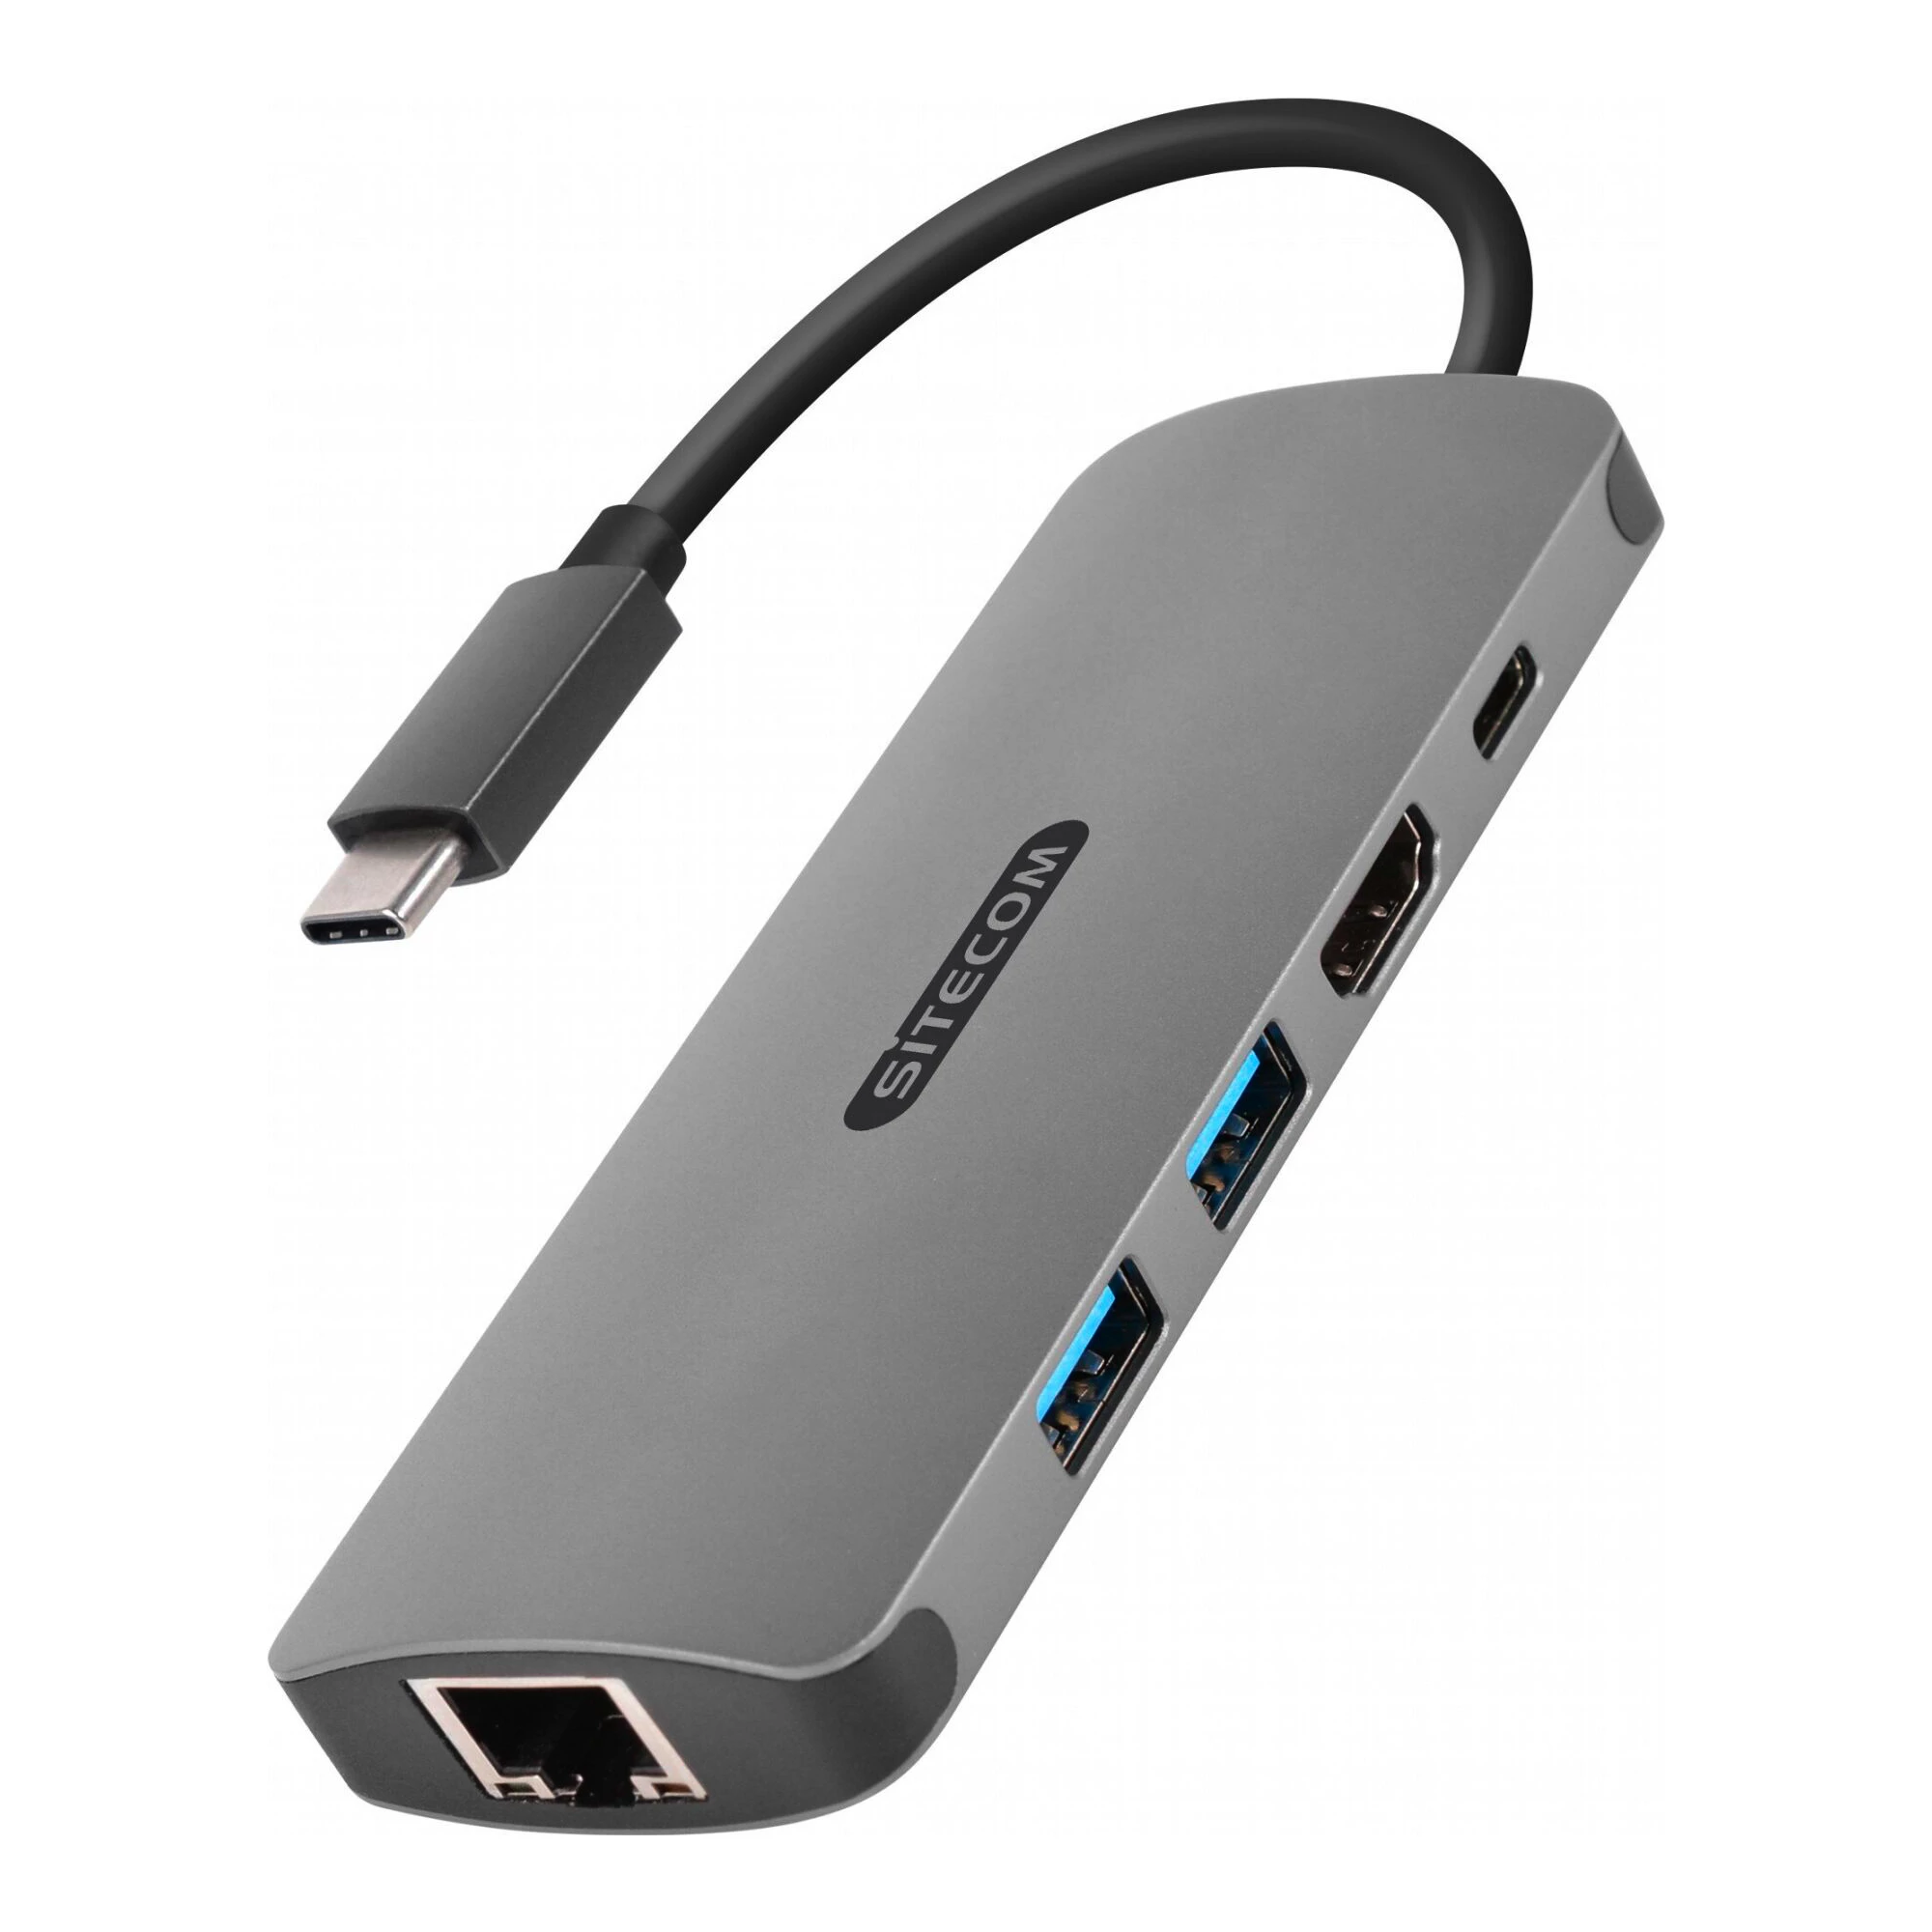 Sitecom USB-C to HDMI + Gigabit LAN Adapter with USB-C Power Delivery (CN-379)